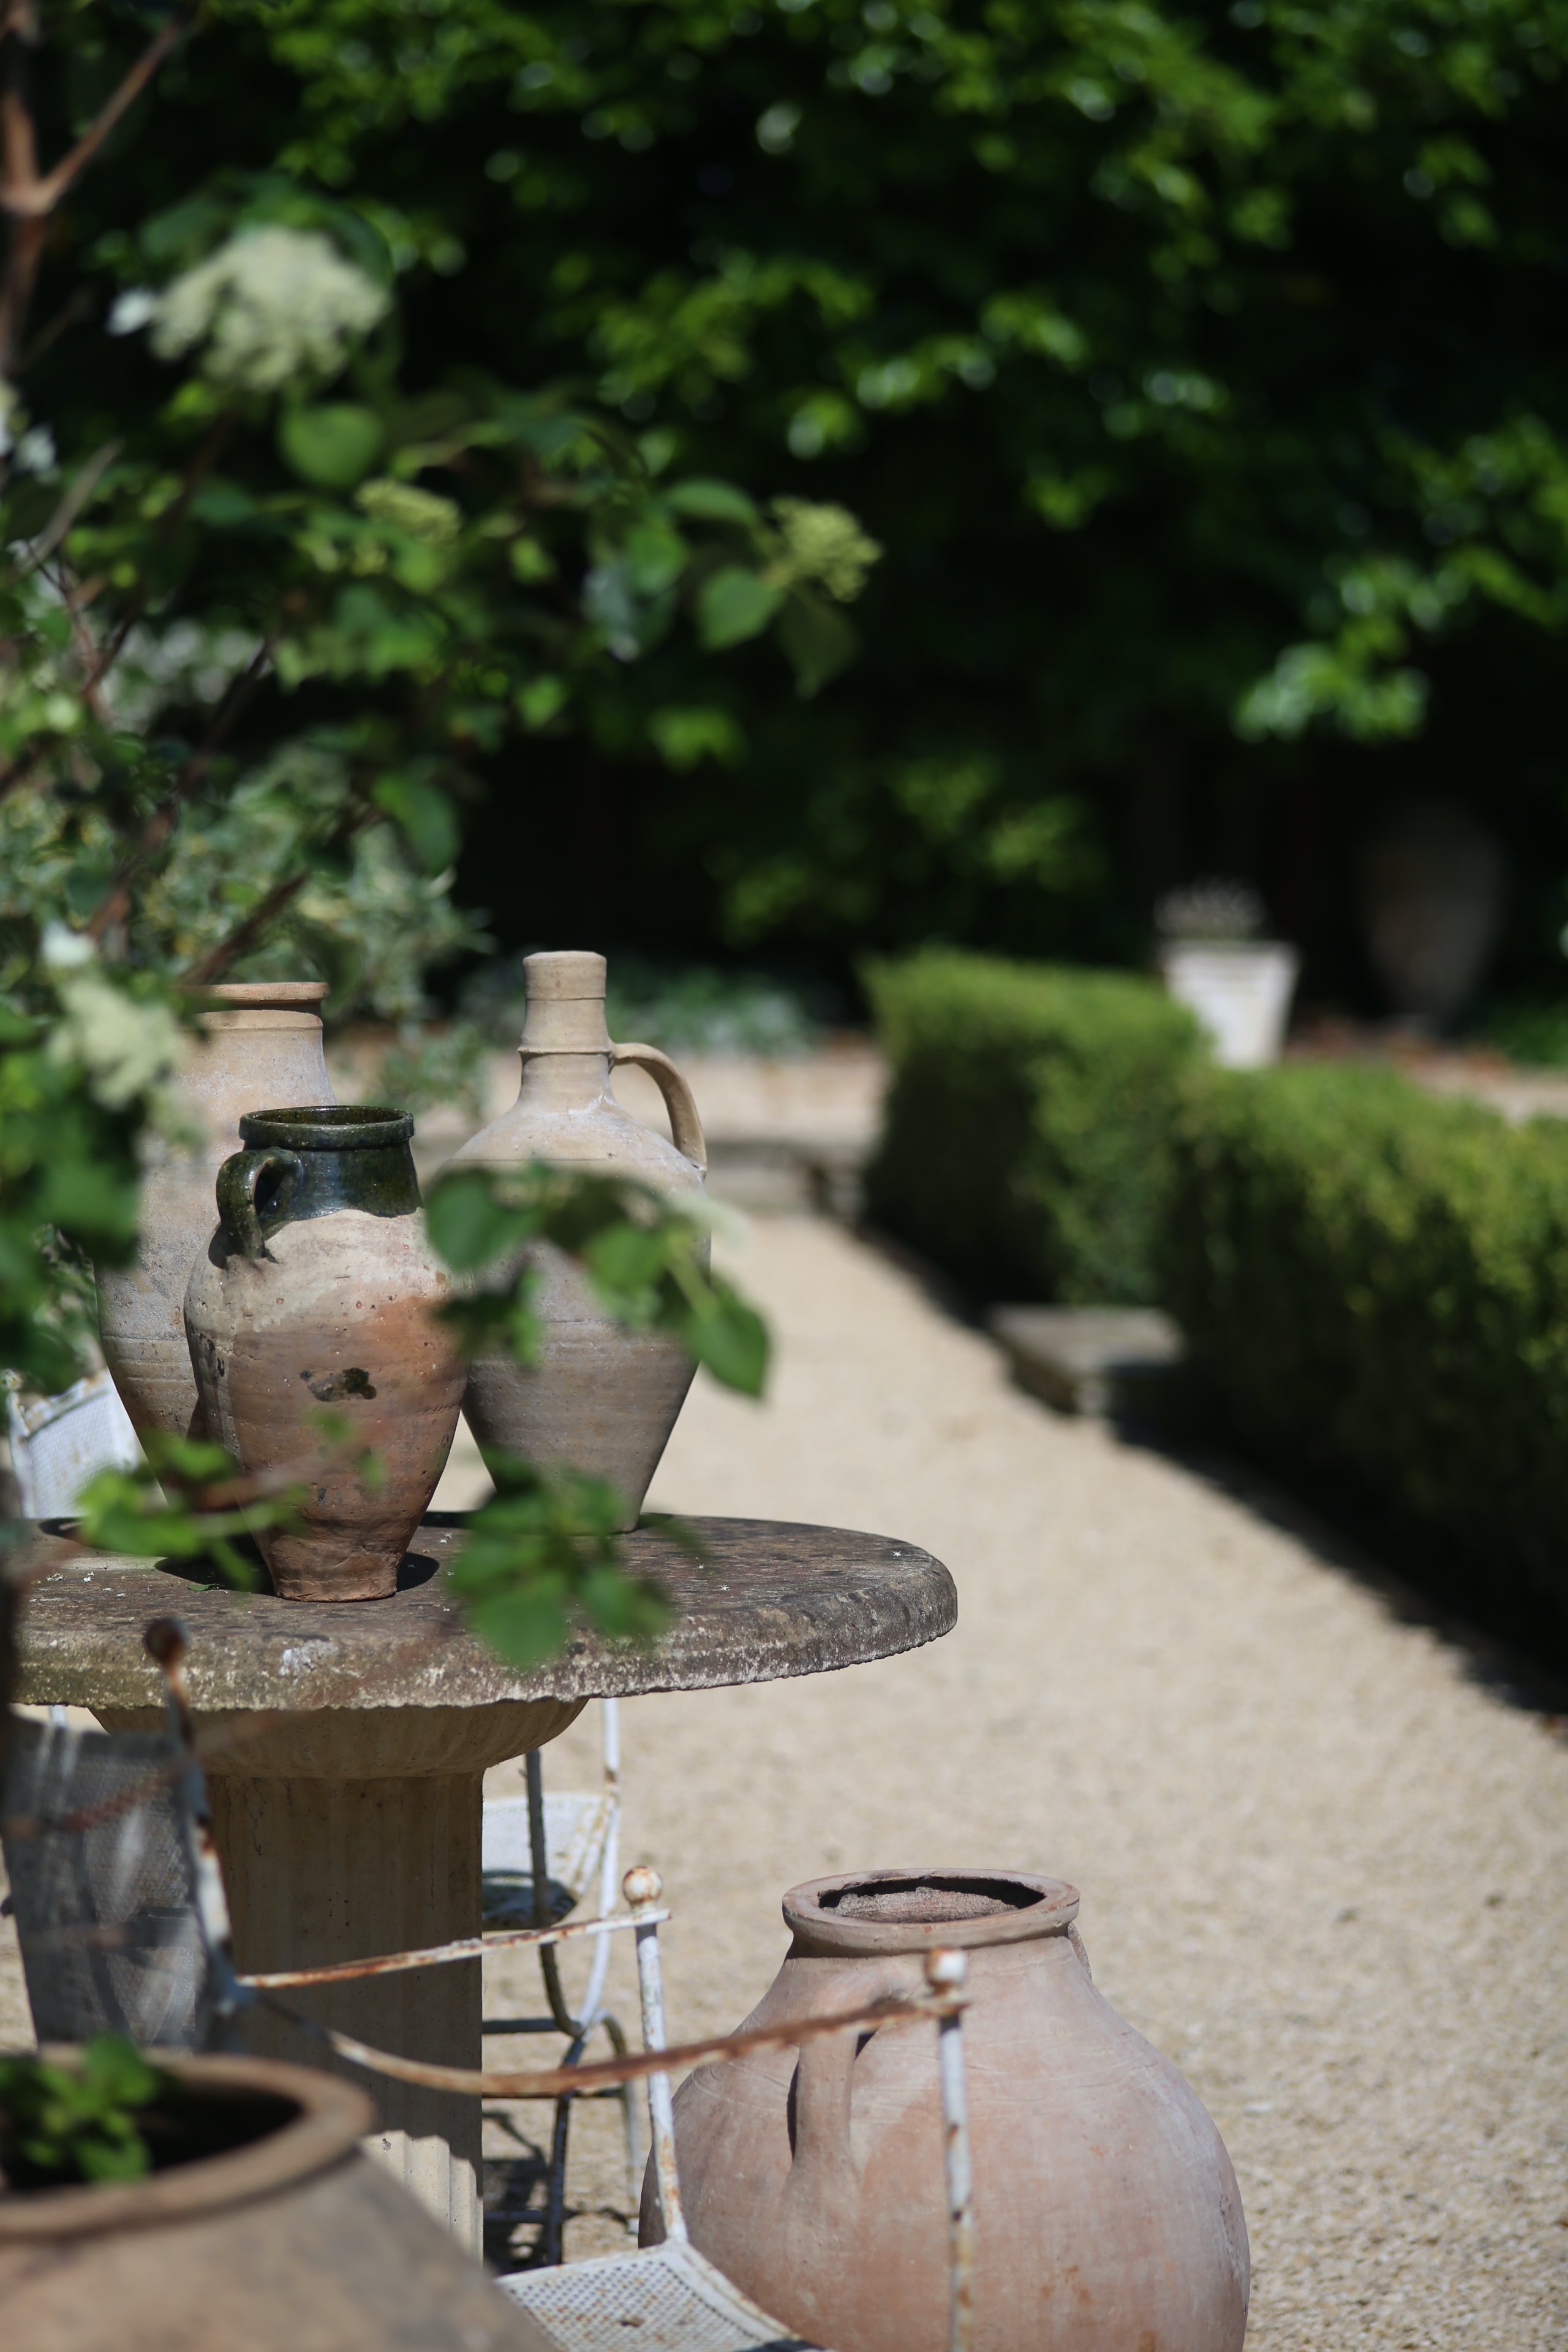 Small pottery pieces on antique french garden furniture + large planted olive pots on country garden path